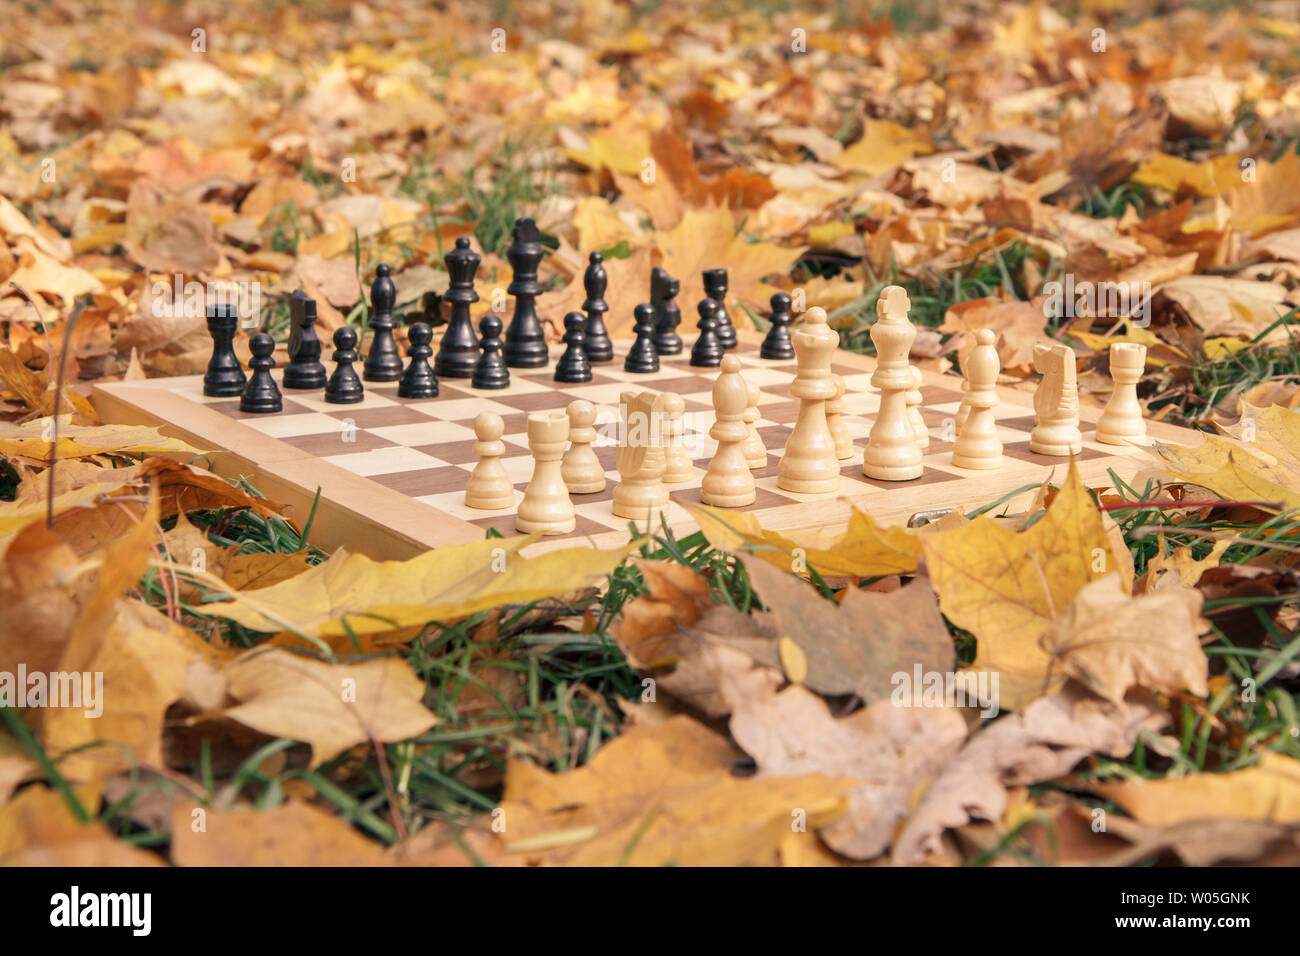 Wooden chessboard and pieces on a grassy ground covered with dry yellow leaves in the city park. Focus on white pieces. Stock Photo